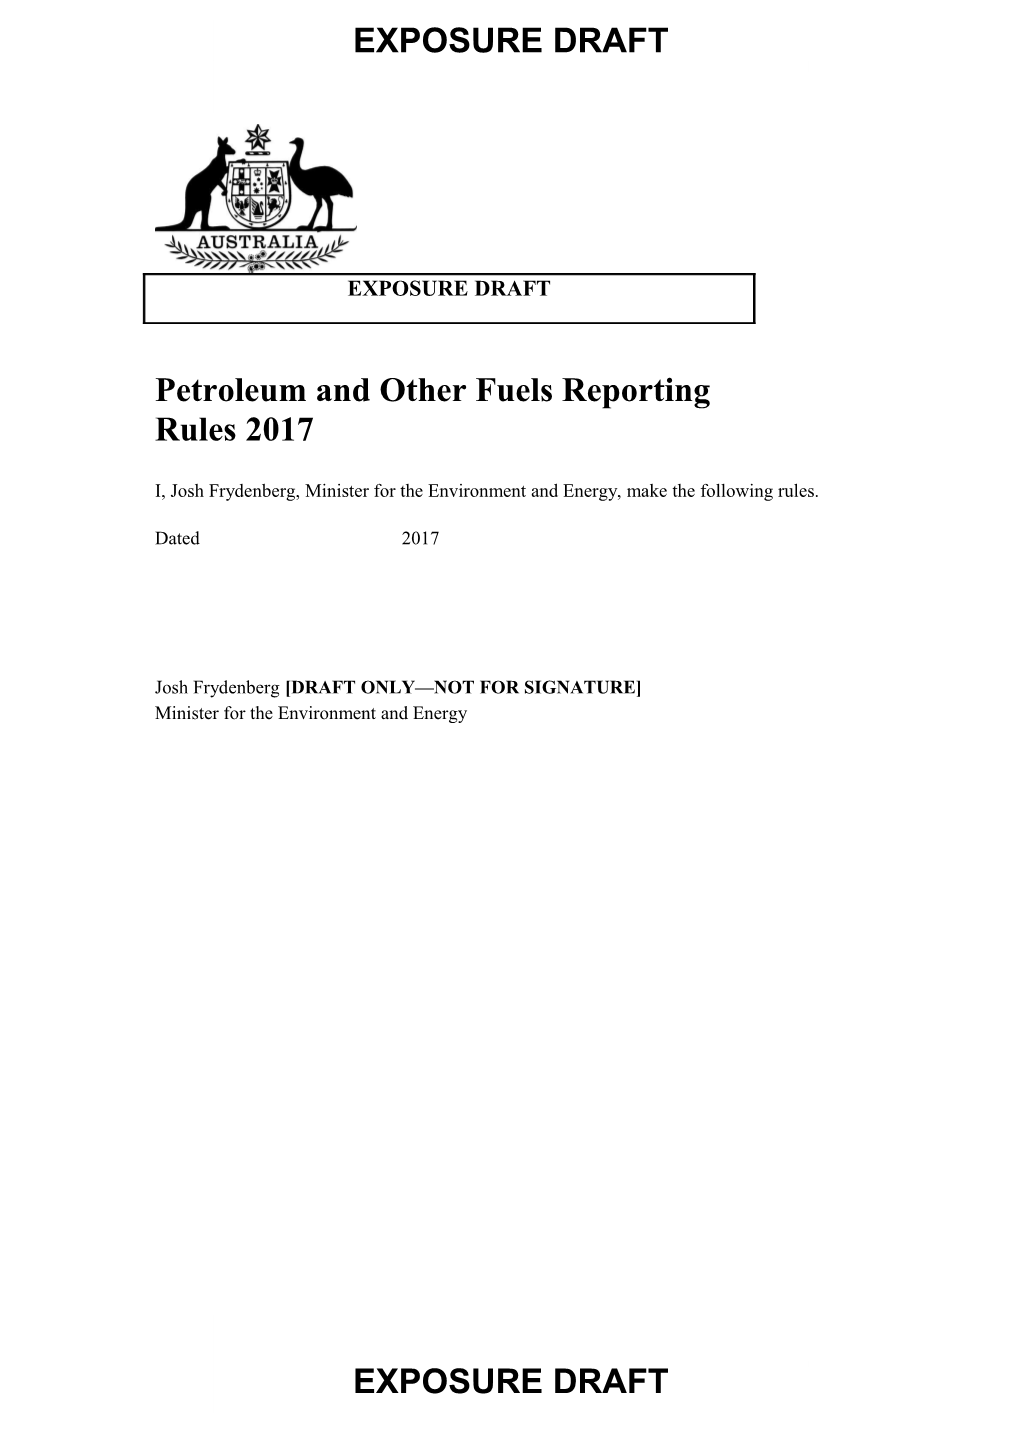 Petroleum and Other Fuels Reporting Rules - Exposure Draft, 2017 (DOC 383 KB)